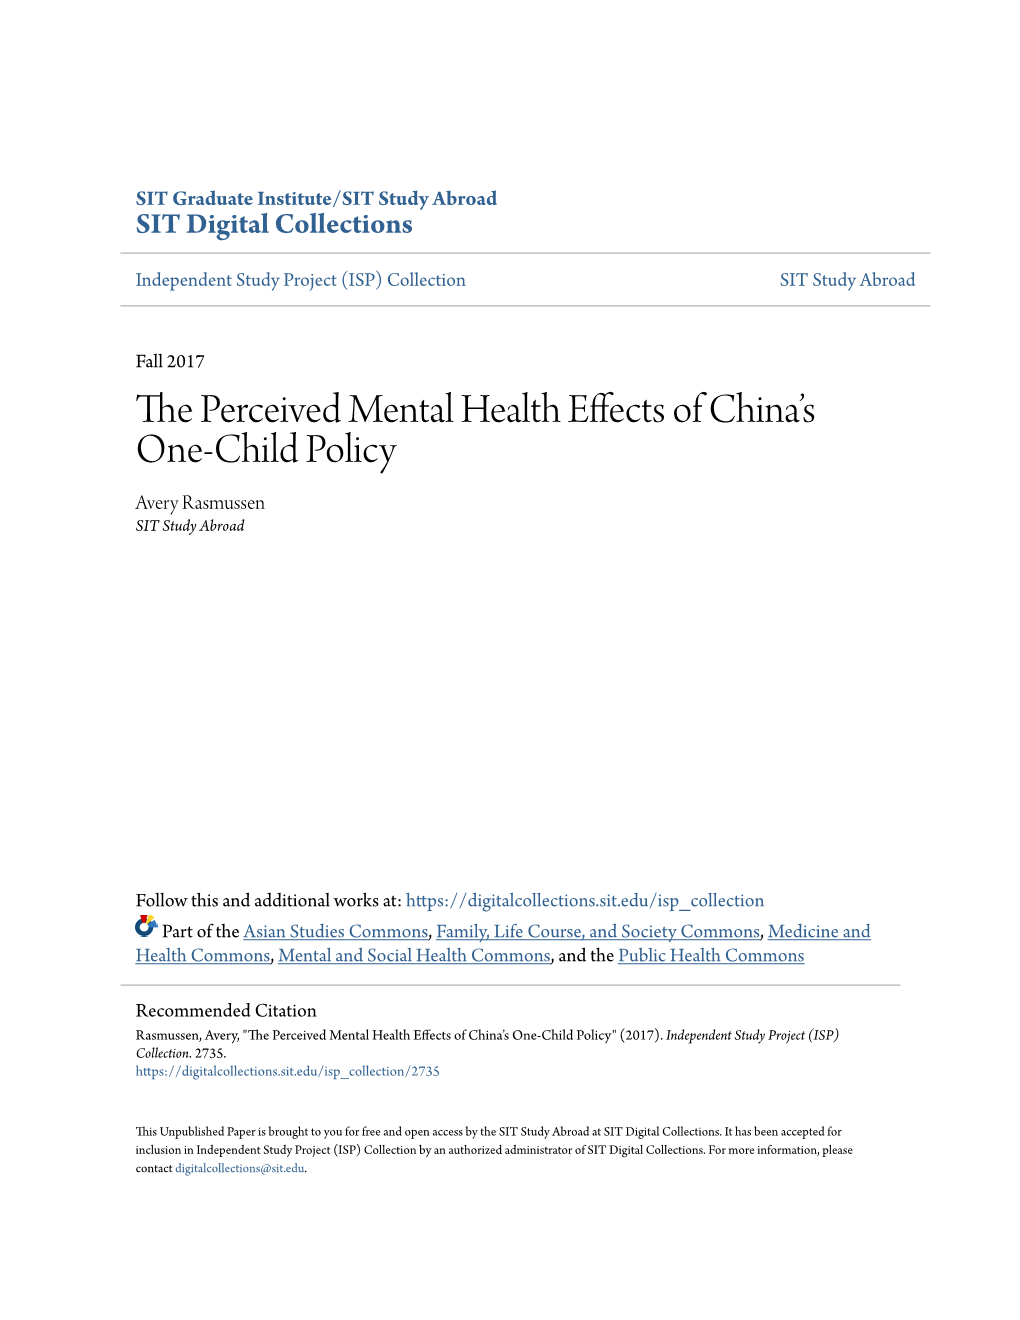 The Perceived Mental Health Effects of China's One-Child Policy